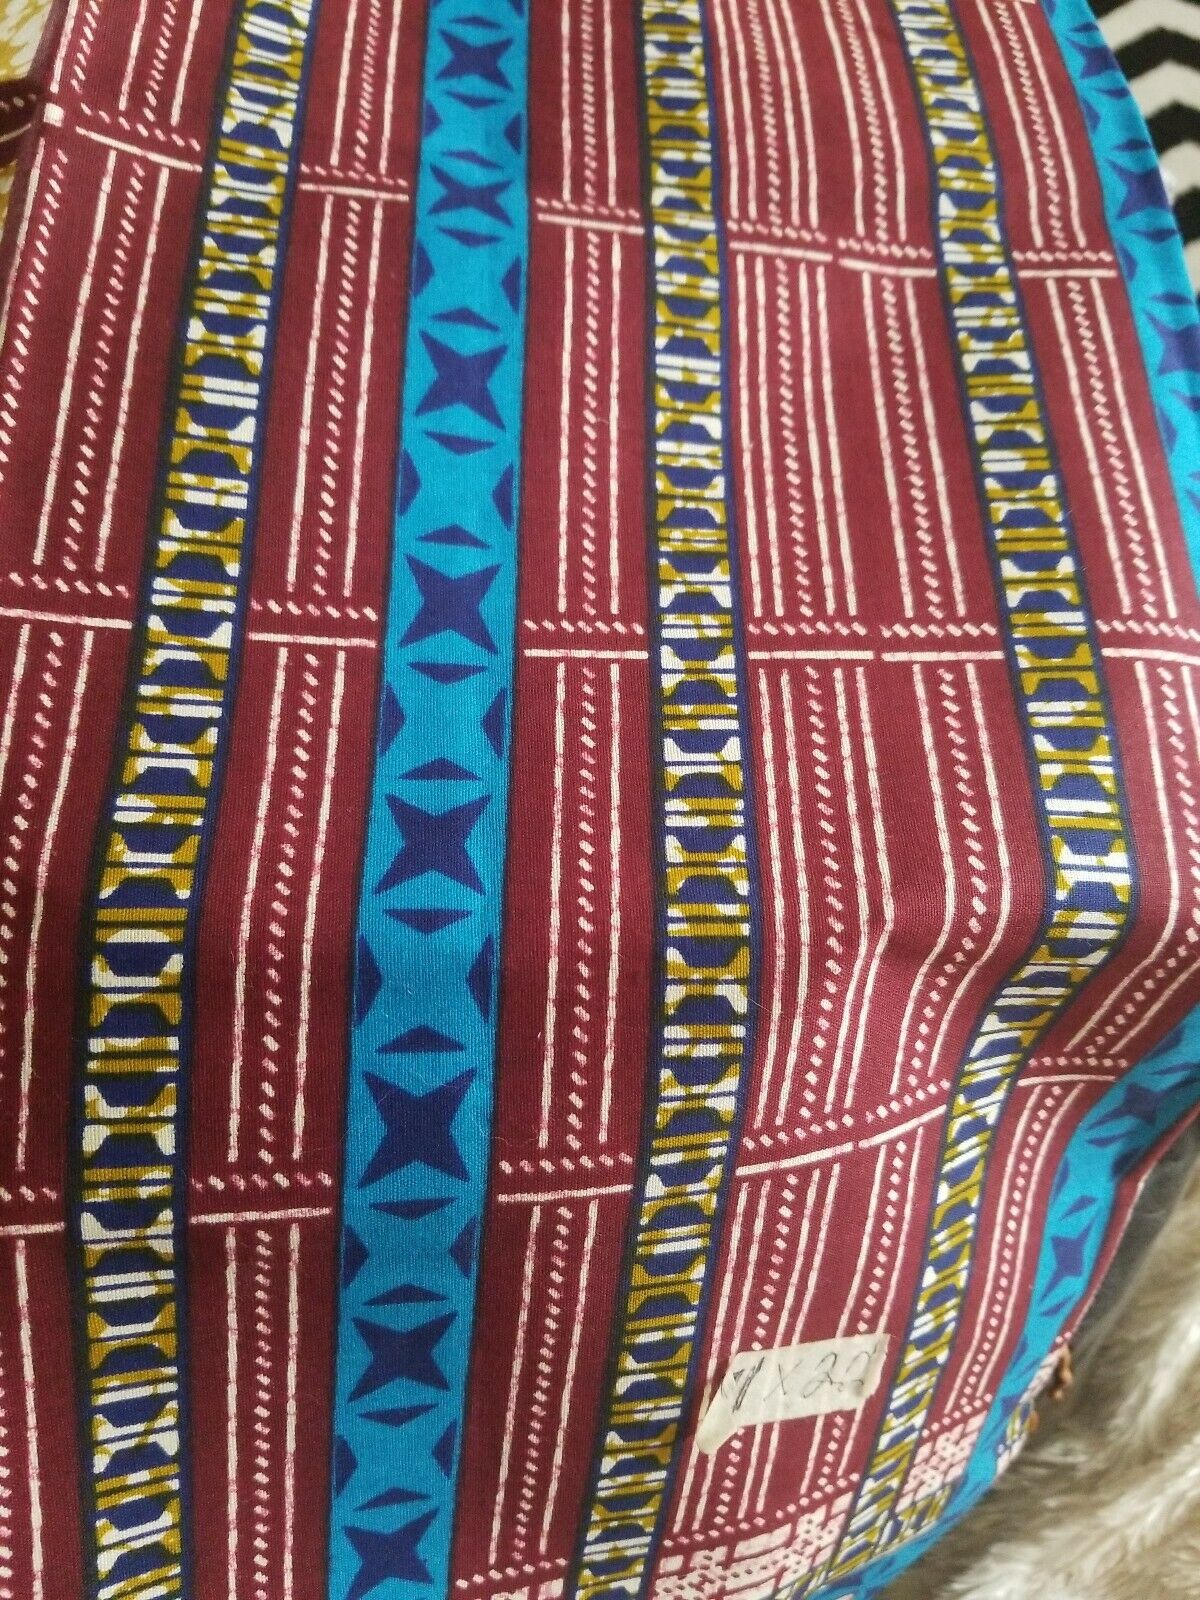 Blue MULTICOLOR African Wax Print 100% Cotton Fabric ~2yards×,22 INCHES~$7.50